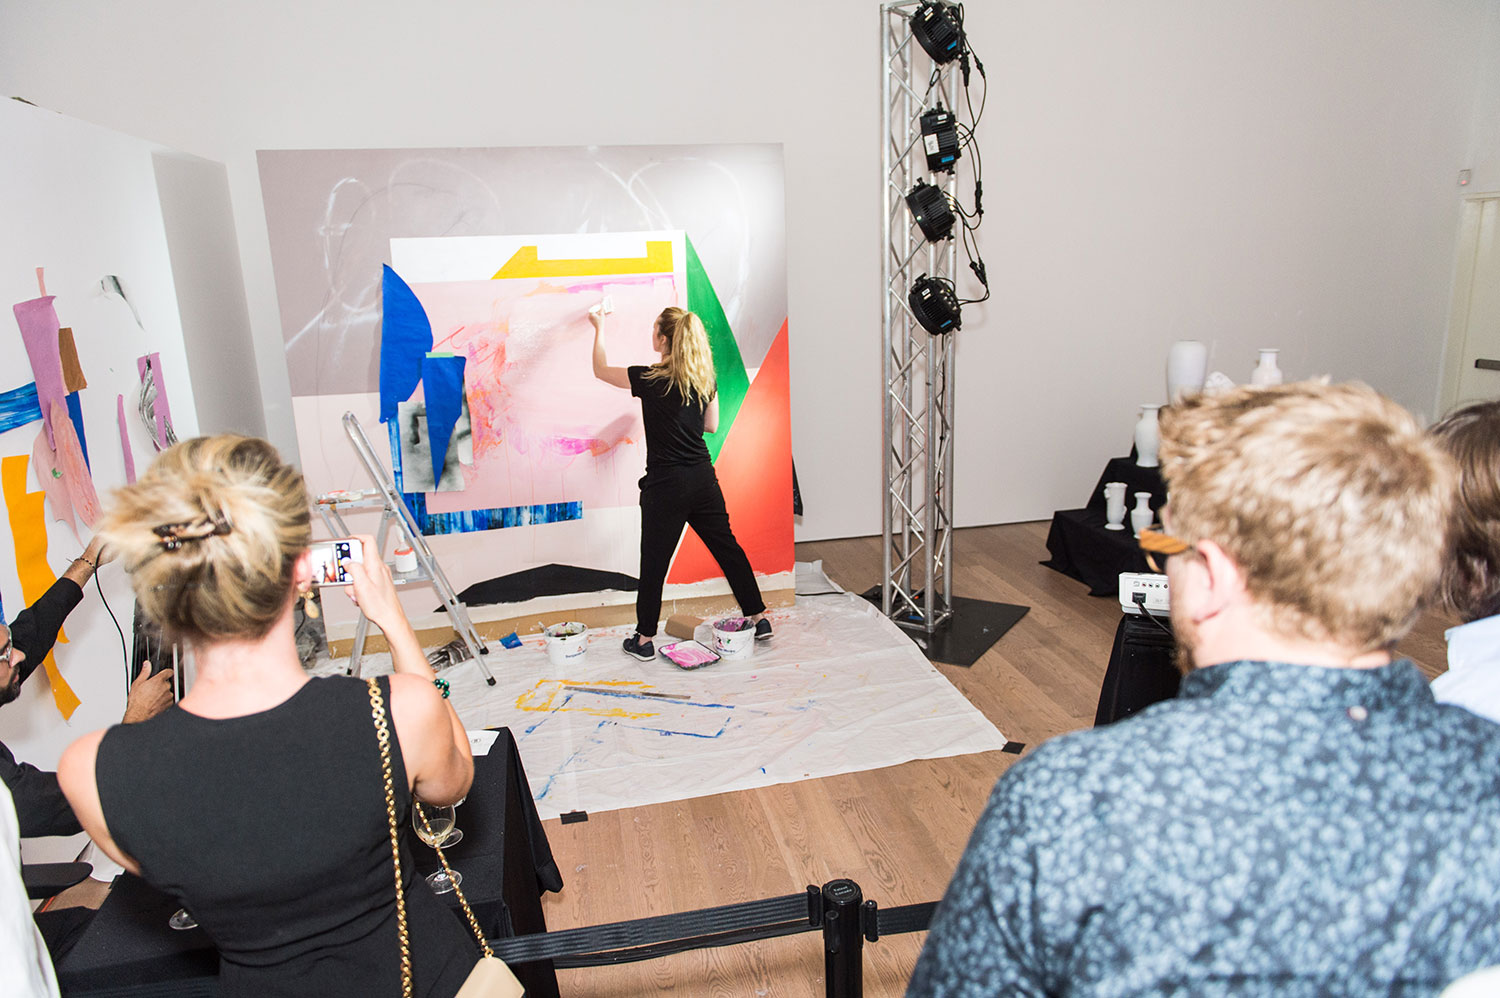 A woman with a blond ponytail live painting while people watch